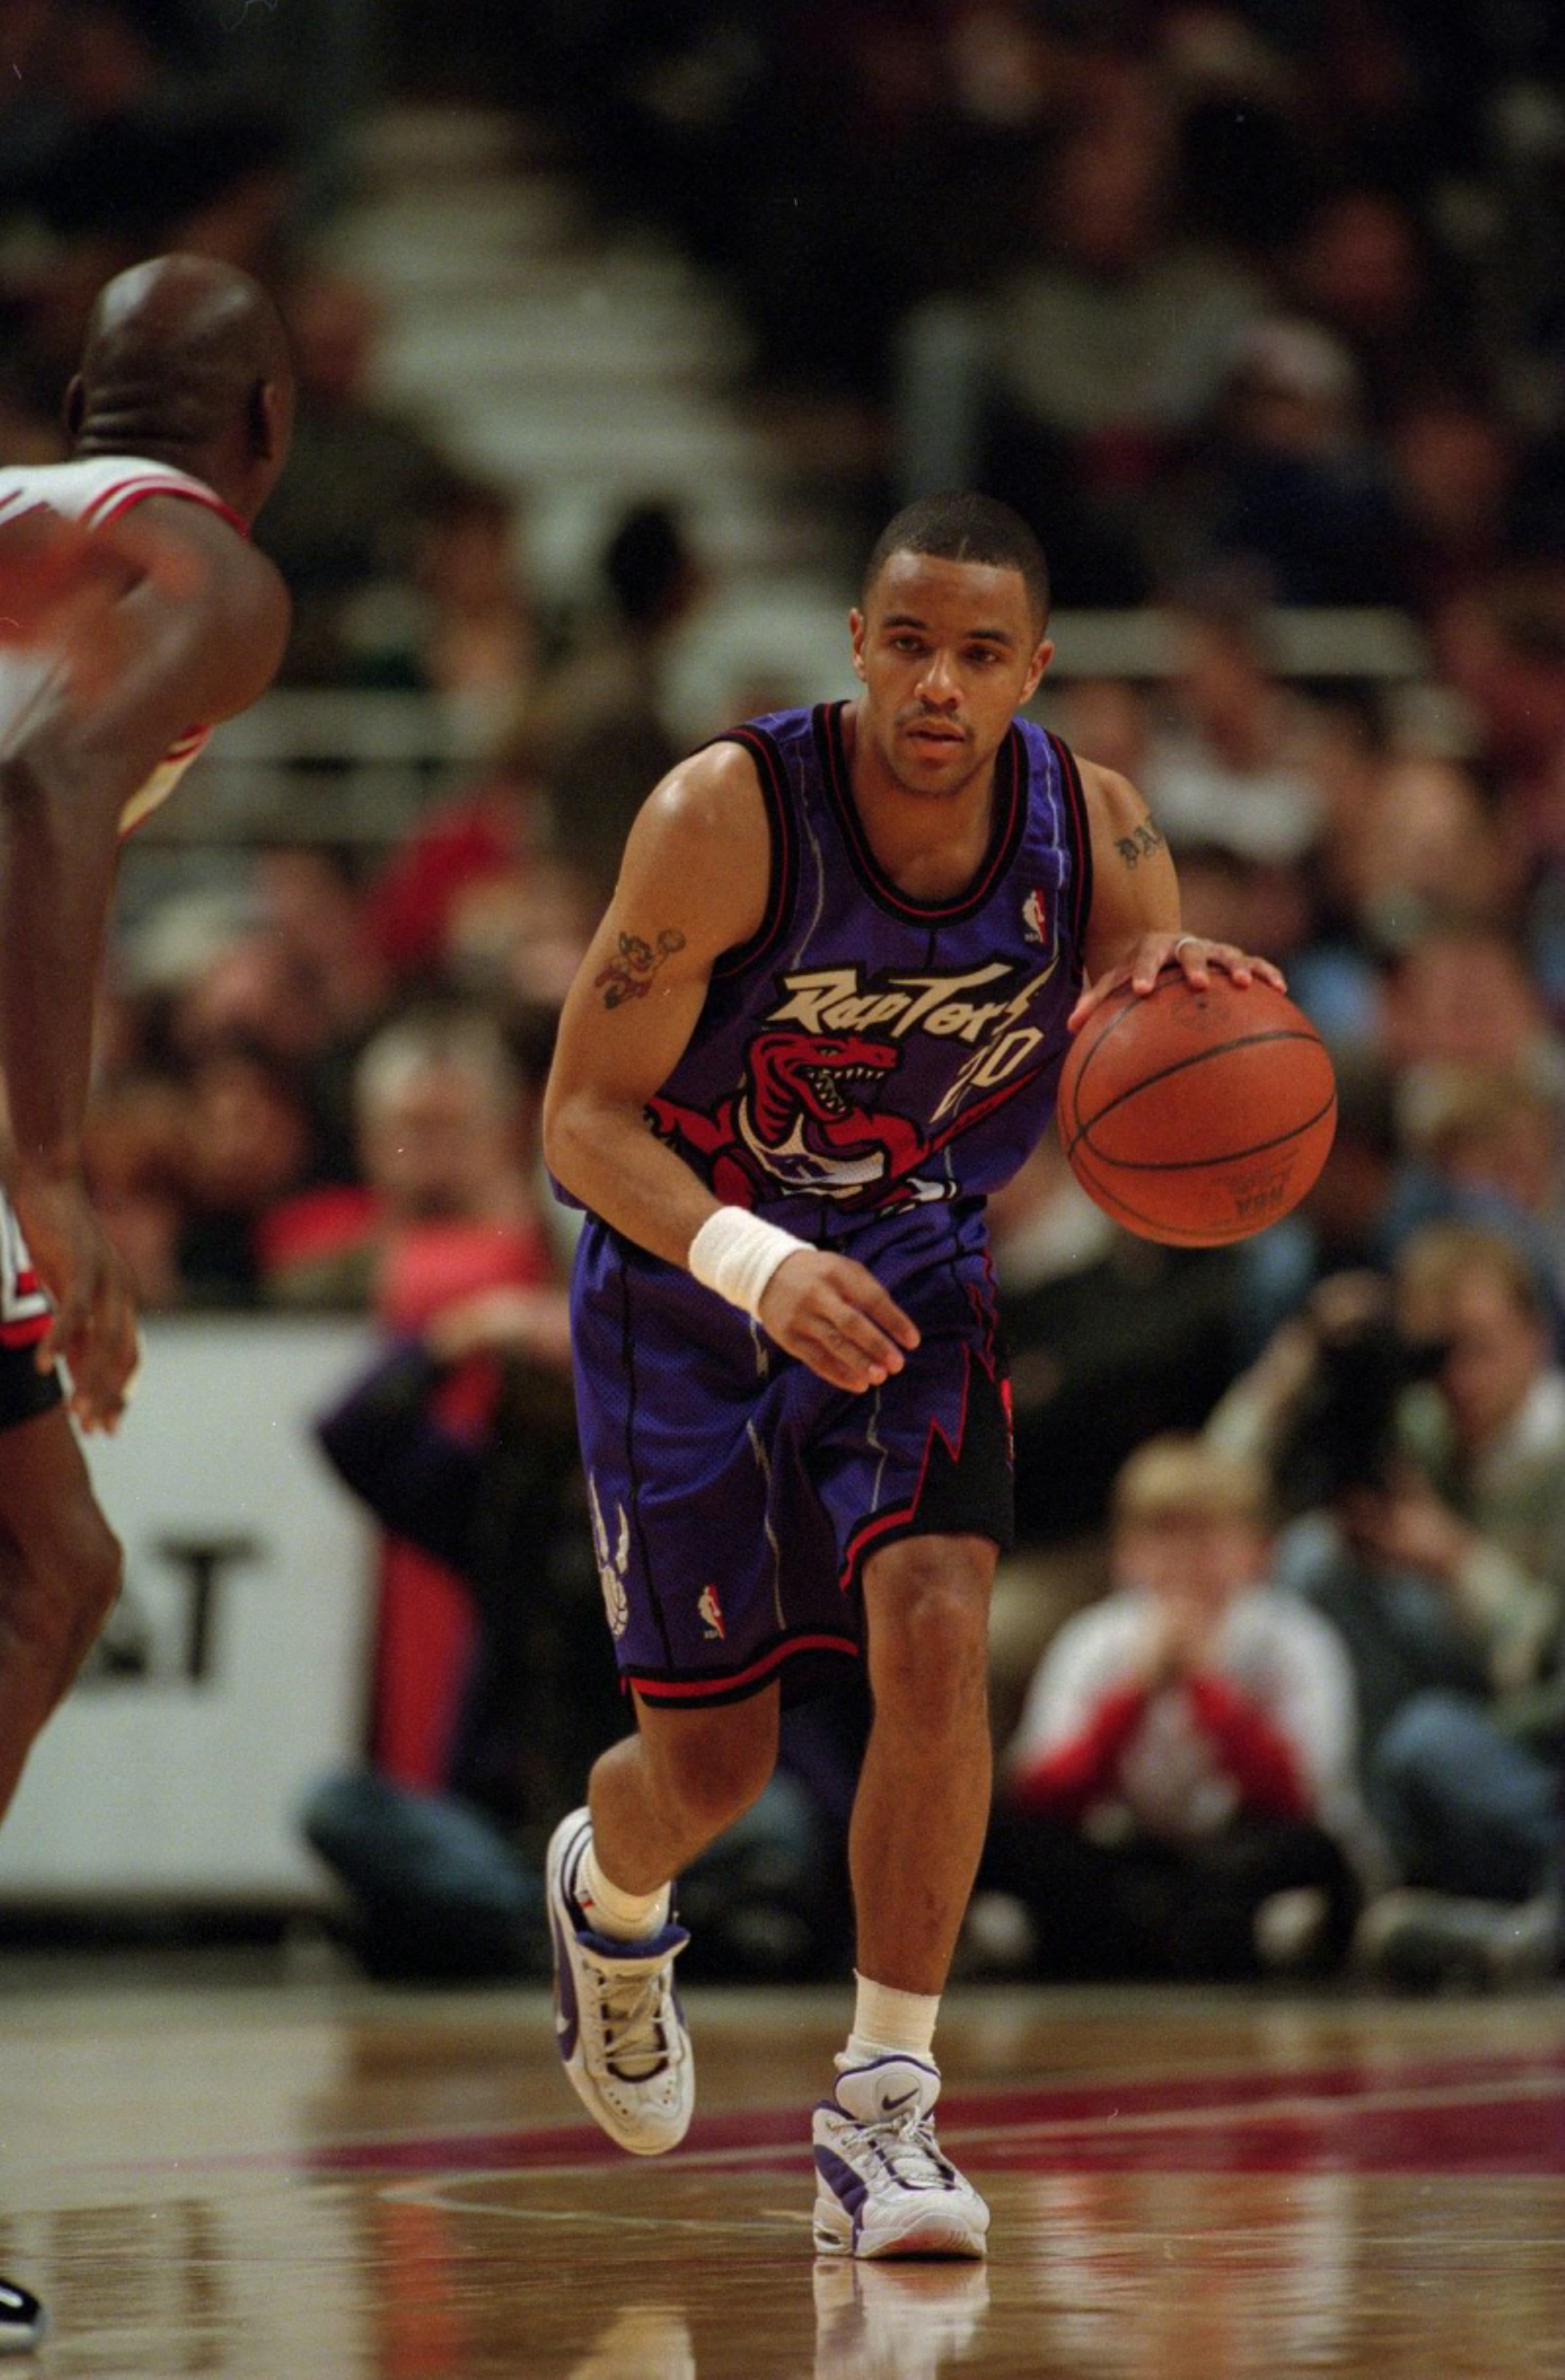 Grading the Toronto Raptors first ever NBA Draft in 1995